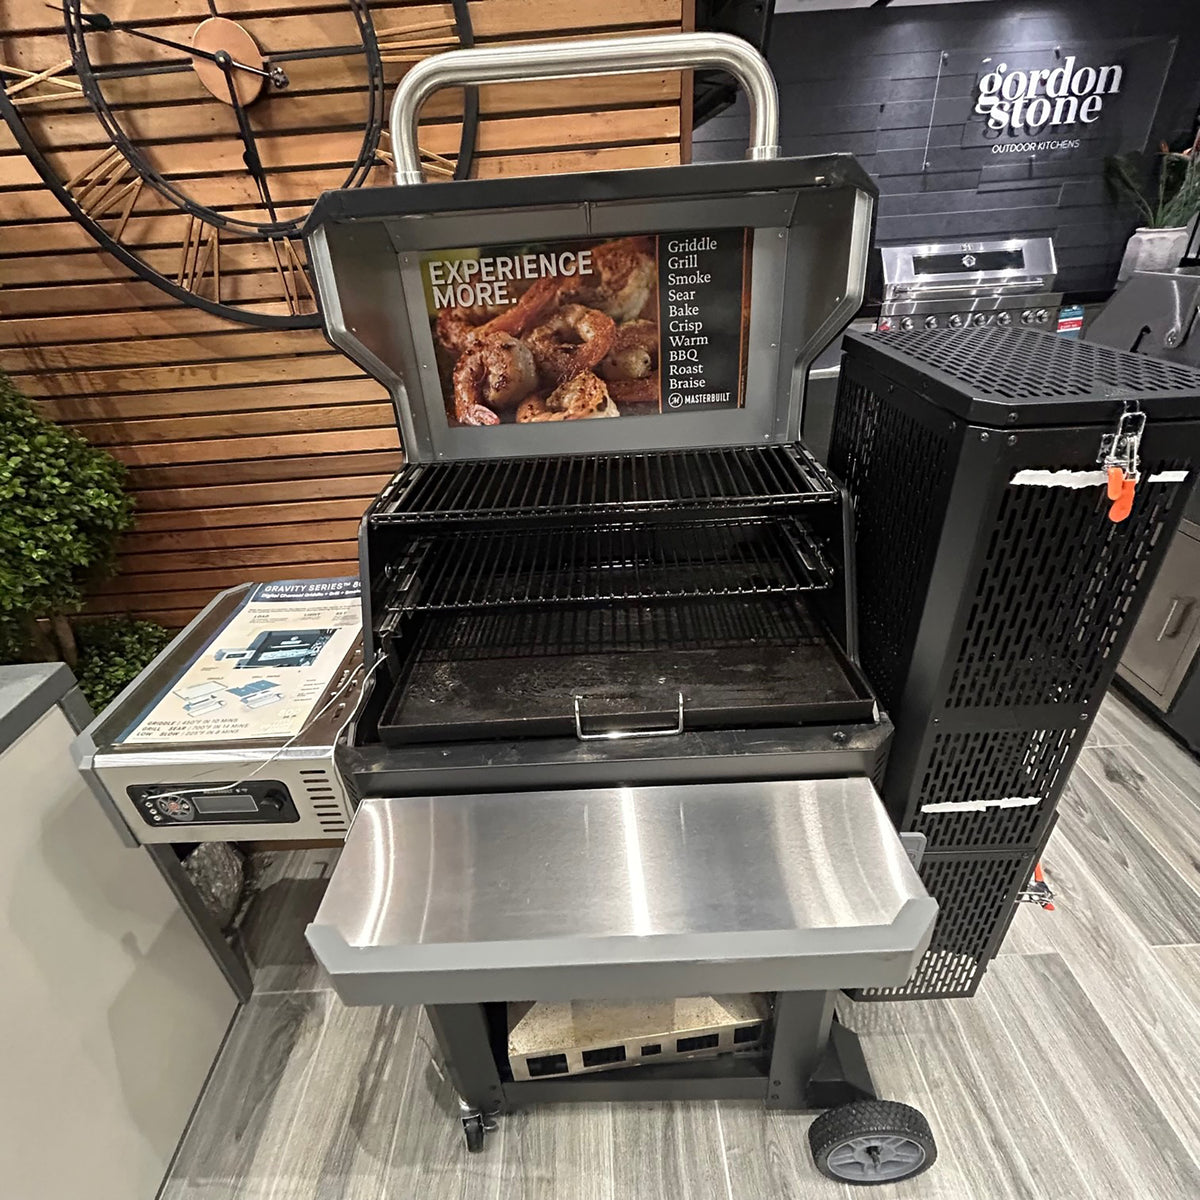 Ex Display Masterbuilt Digital Charcoal Grill, Smoker And Griddle Gravity Fed 800